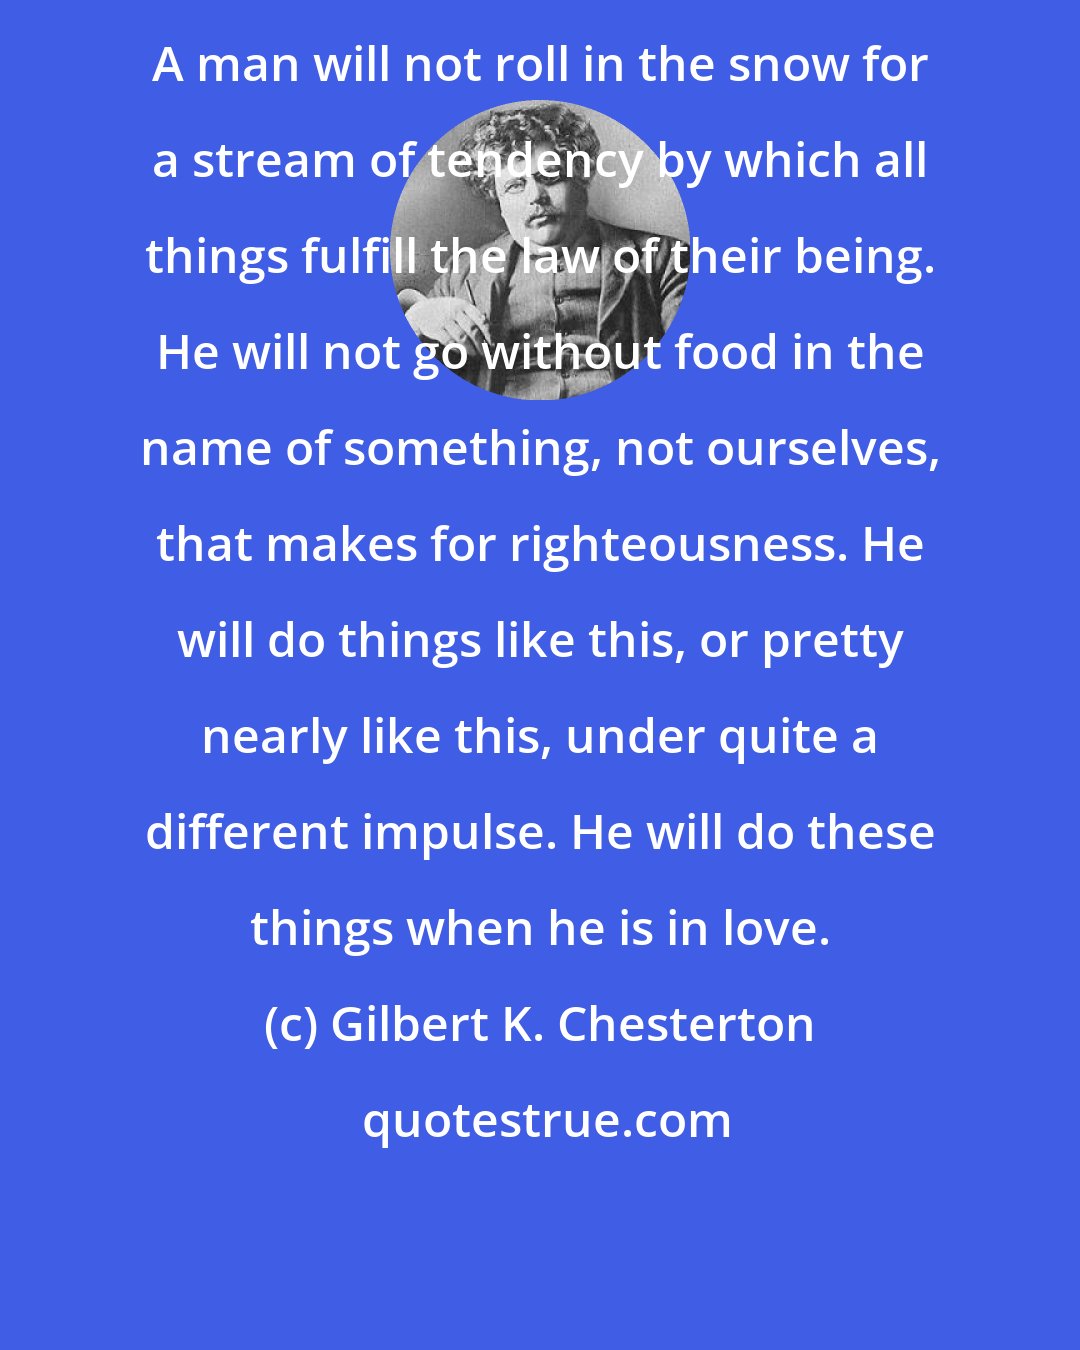 Gilbert K. Chesterton: A man will not roll in the snow for a stream of tendency by which all things fulfill the law of their being. He will not go without food in the name of something, not ourselves, that makes for righteousness. He will do things like this, or pretty nearly like this, under quite a different impulse. He will do these things when he is in love.